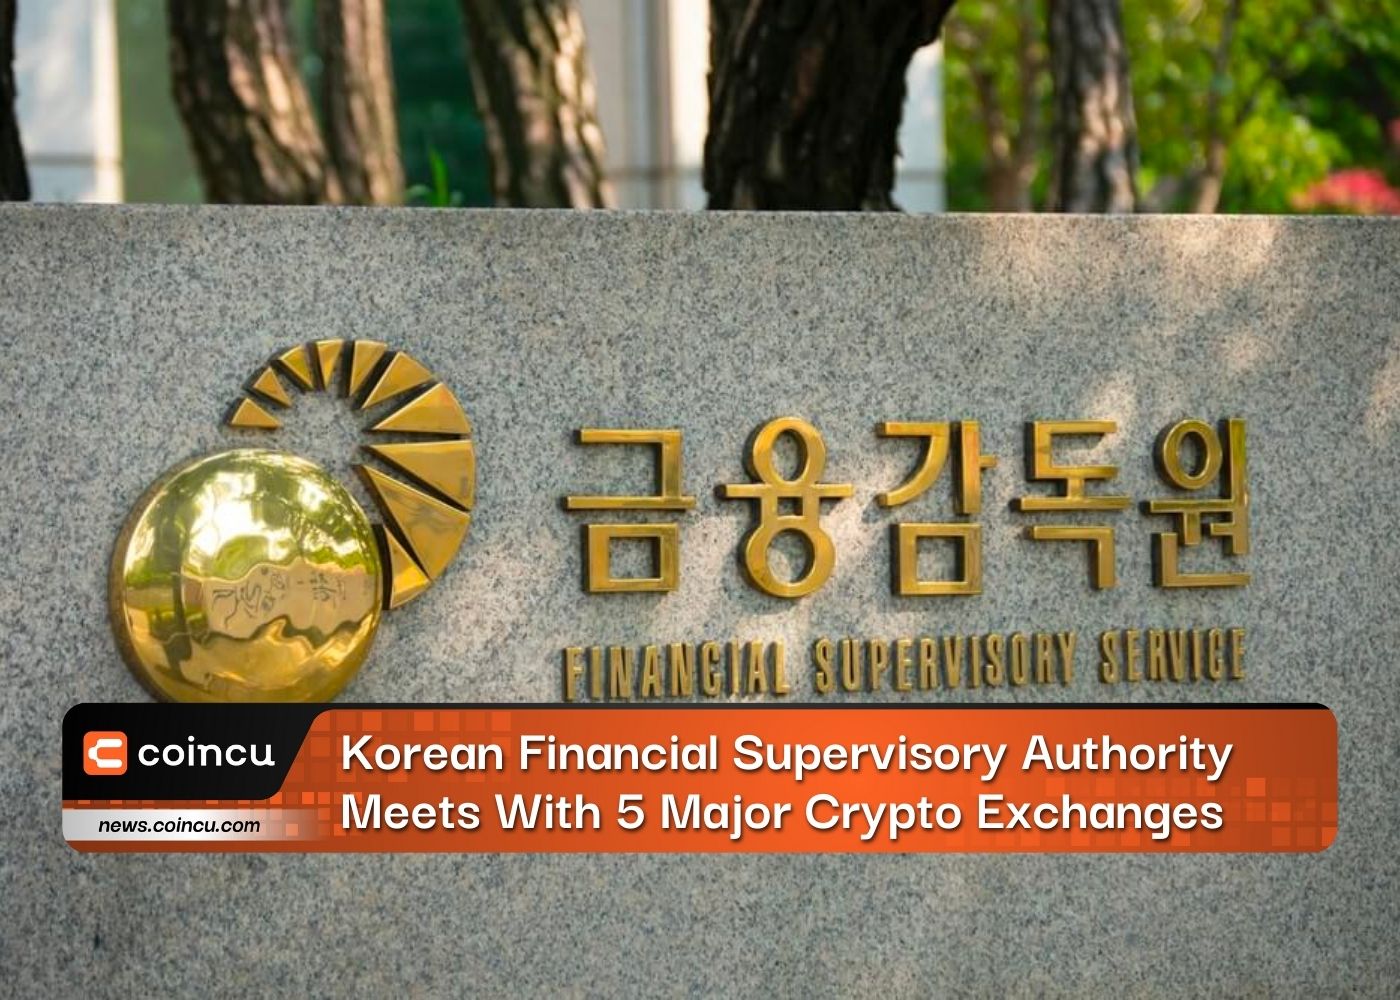 Korean Financial Supervisory Authority Meets With 5 Major Crypto Exchanges